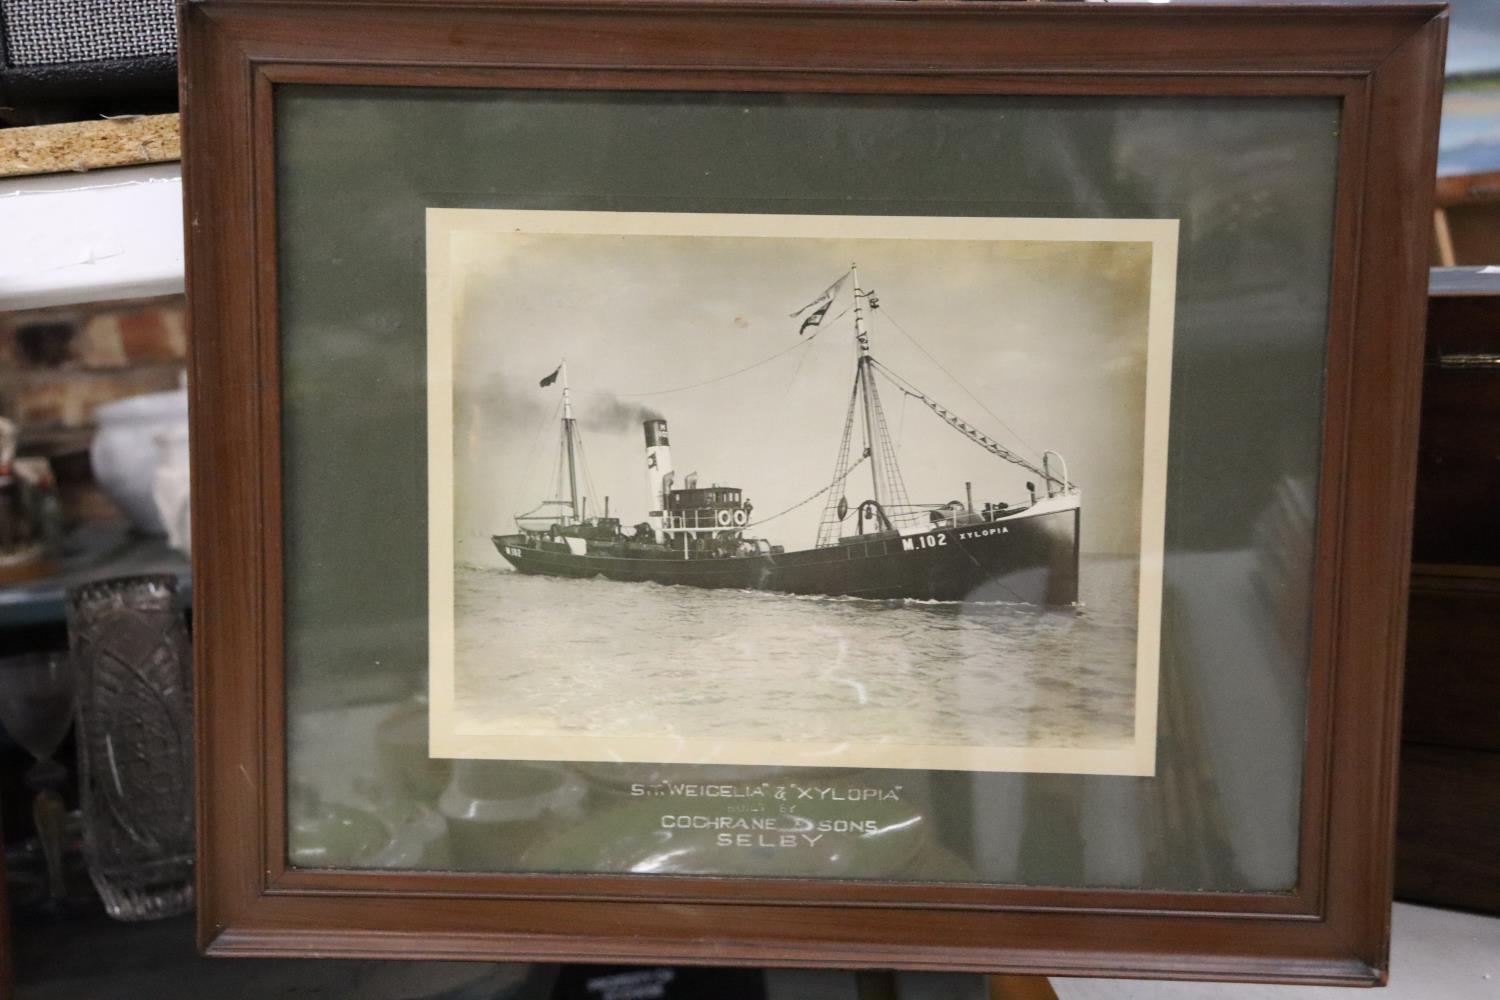 A VINTAGE FRAMED PHOTOGRAPH OF A SHIP, BUILT BY COCHRANE AND SONS, SELBY